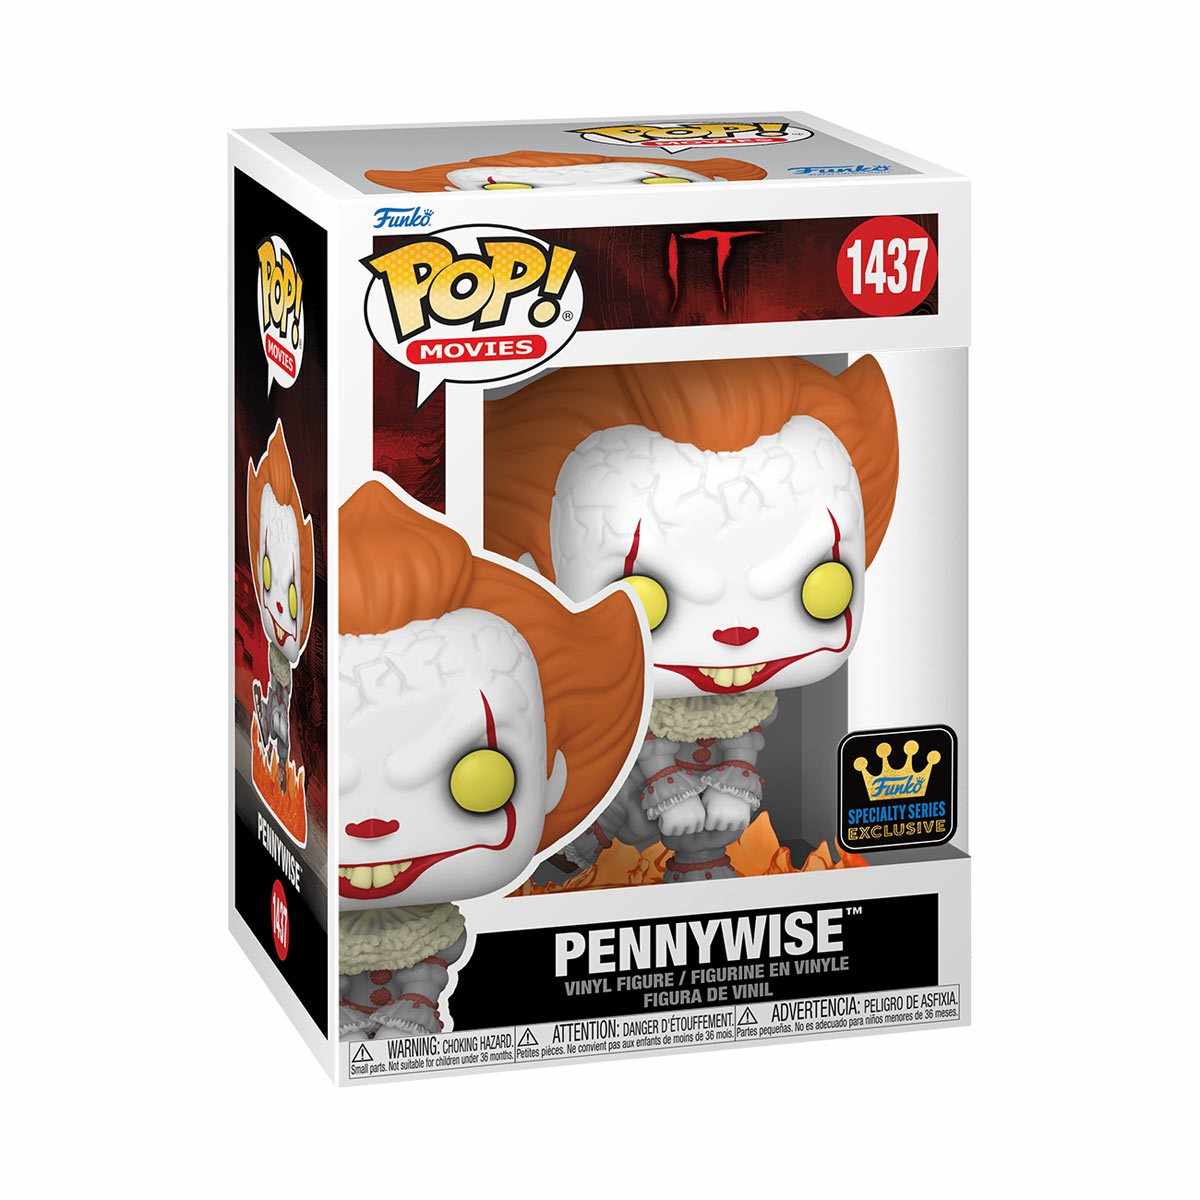 FUNKO POP! PENNYWISE DANCING IT SPECIALTY SERIES #1437 FIGURE IN STOCK